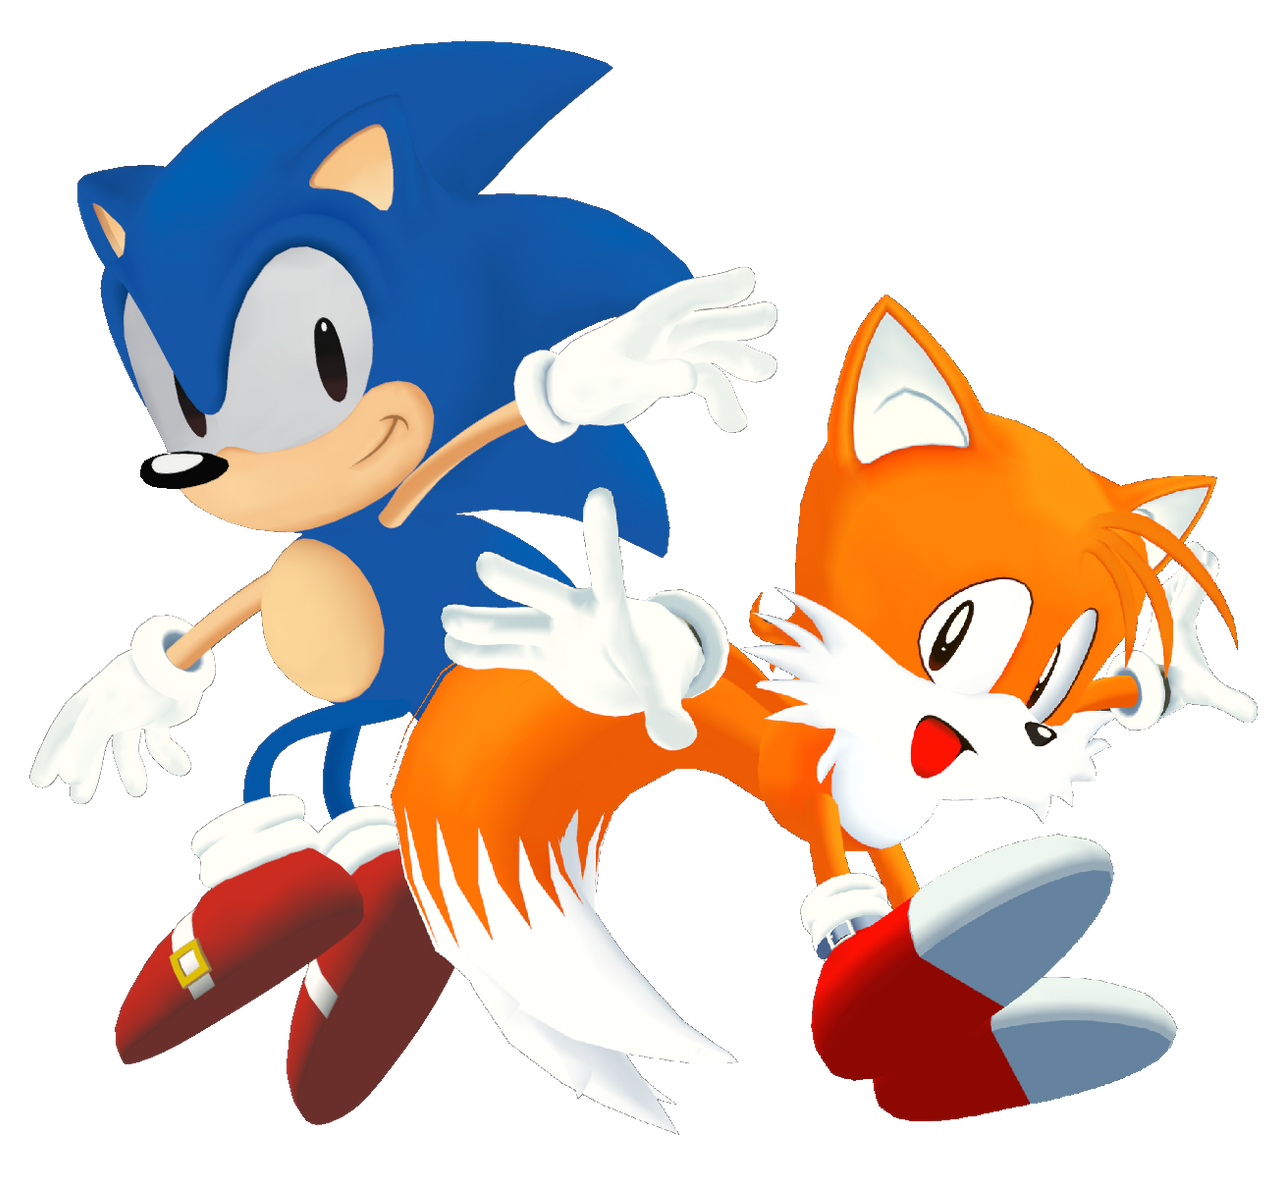 definitive_classic_sonic_and_tails_by_kromosruby_dg7vrjr-fullview.png